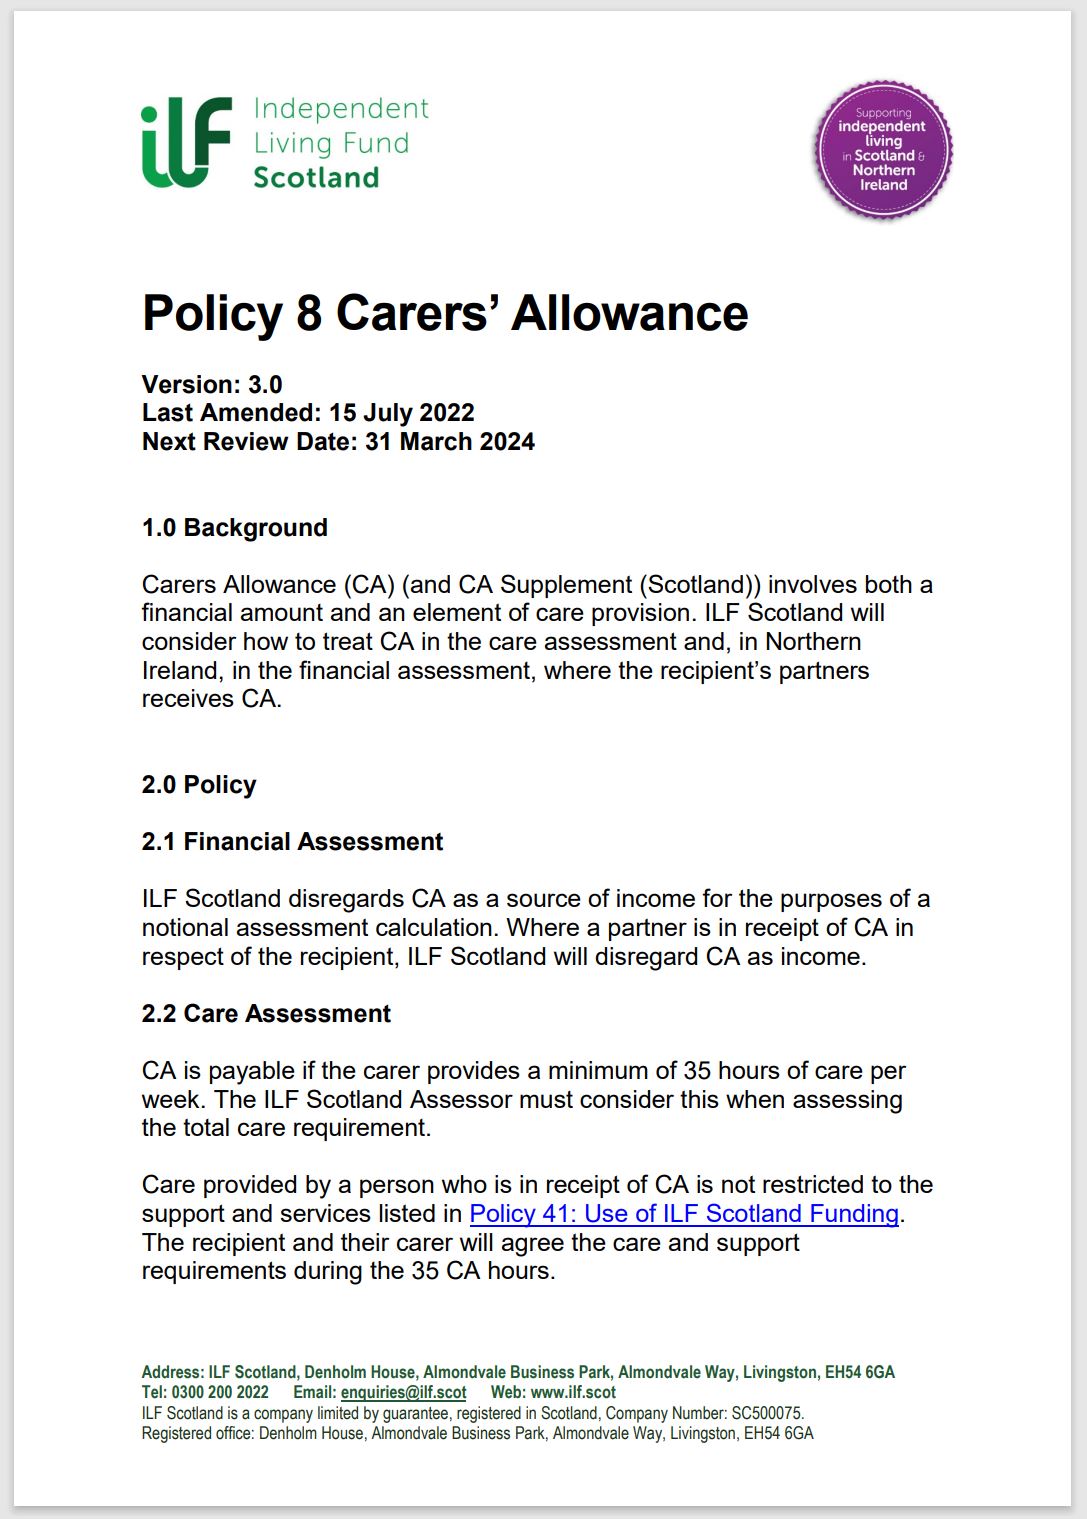 Cover of policy 8, containing ILF Scotland logo and page of text.